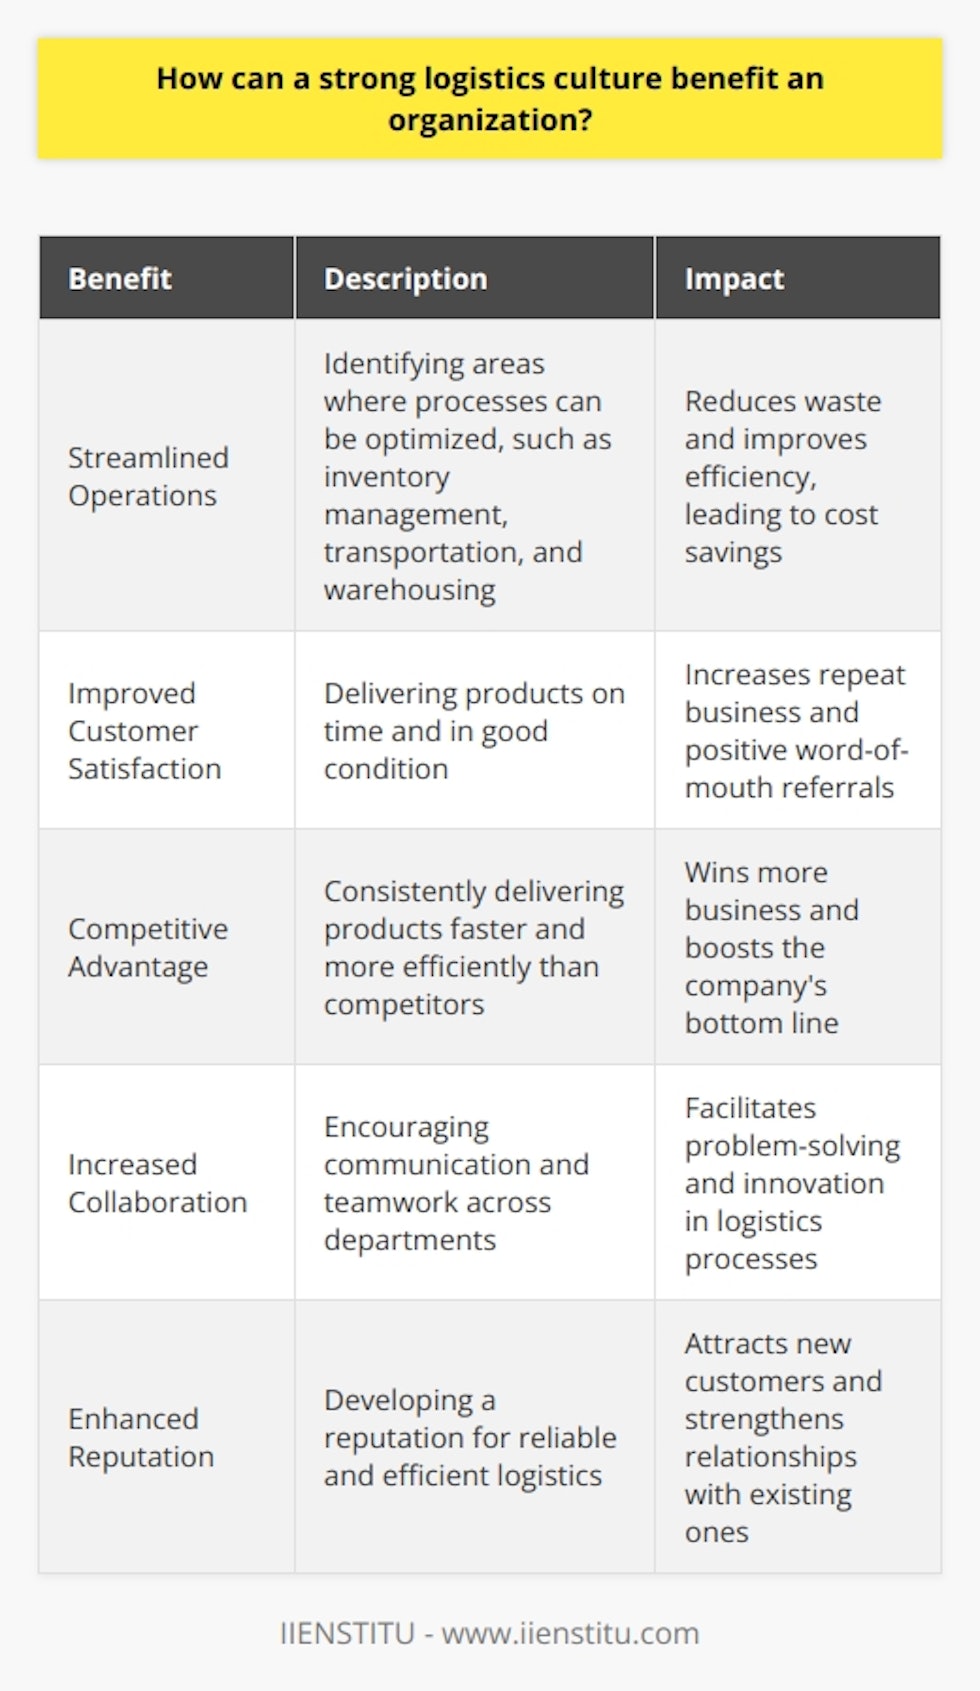 A strong logistics culture can greatly benefit an organization in several ways. When a company prioritizes efficient and effective logistics, it can lead to reduced costs, improved customer satisfaction, and a competitive advantage in the market. Streamlined Operations By fostering a culture that values logistics, companies can streamline their operations and reduce waste. This means identifying areas where processes can be optimized, such as inventory management, transportation, and warehousing. When everyone in the organization is focused on improving logistics, it becomes easier to spot inefficiencies and implement solutions. Real-World Example I once worked for a company that had a disjointed logistics system. Each department had its own way of doing things, which led to a lot of confusion and delays. However, when we implemented a company-wide logistics culture, we were able to identify bottlenecks and streamline our processes. As a result, we reduced our shipping times by 20% and increased customer satisfaction. Improved Customer Satisfaction A strong logistics culture can also lead to improved customer satisfaction. When products are delivered on time and in good condition, customers are more likely to be happy with their purchase. This can lead to repeat business and positive word-of-mouth referrals. Personal Anecdote I remember ordering a product online from a company that clearly didnt prioritize logistics. The package arrived late and was damaged during shipping. It left a bad taste in my mouth, and I never ordered from that company again. On the other hand, when I order from companies with a strong logistics culture, I know I can expect my package to arrive on time and in perfect condition. Competitive Advantage Finally, a strong logistics culture can give a company a competitive advantage in the market. When a company can consistently deliver products faster and more efficiently than its competitors, it can win more business and boost its bottom line. In todays fast-paced business environment, logistics can make or break a company. By prioritizing logistics and fostering a culture that values efficiency and effectiveness, organizations can set themselves up for long-term success.